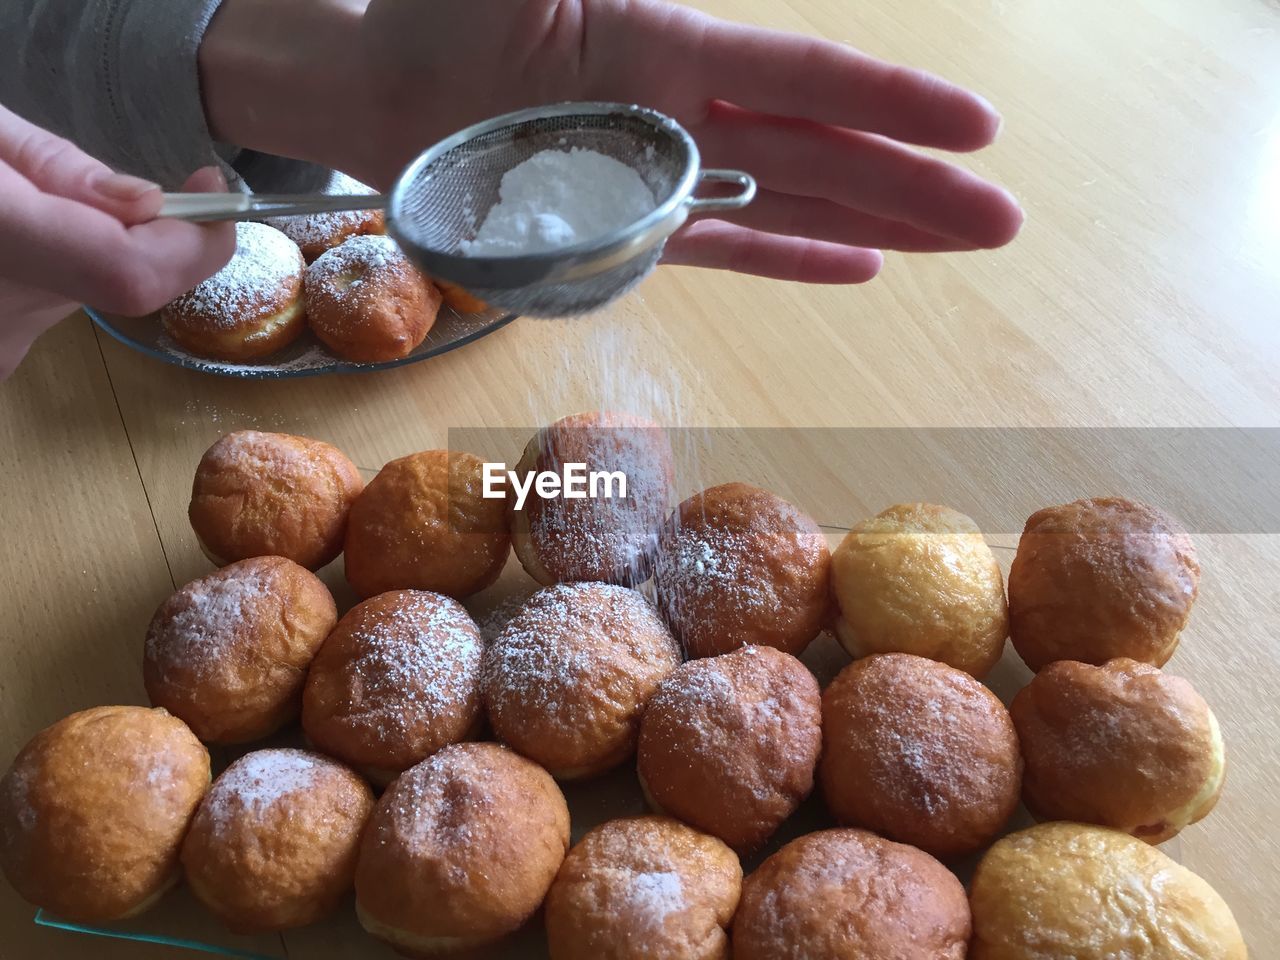 Cropped image of hand dusting powdered sugar on donuts